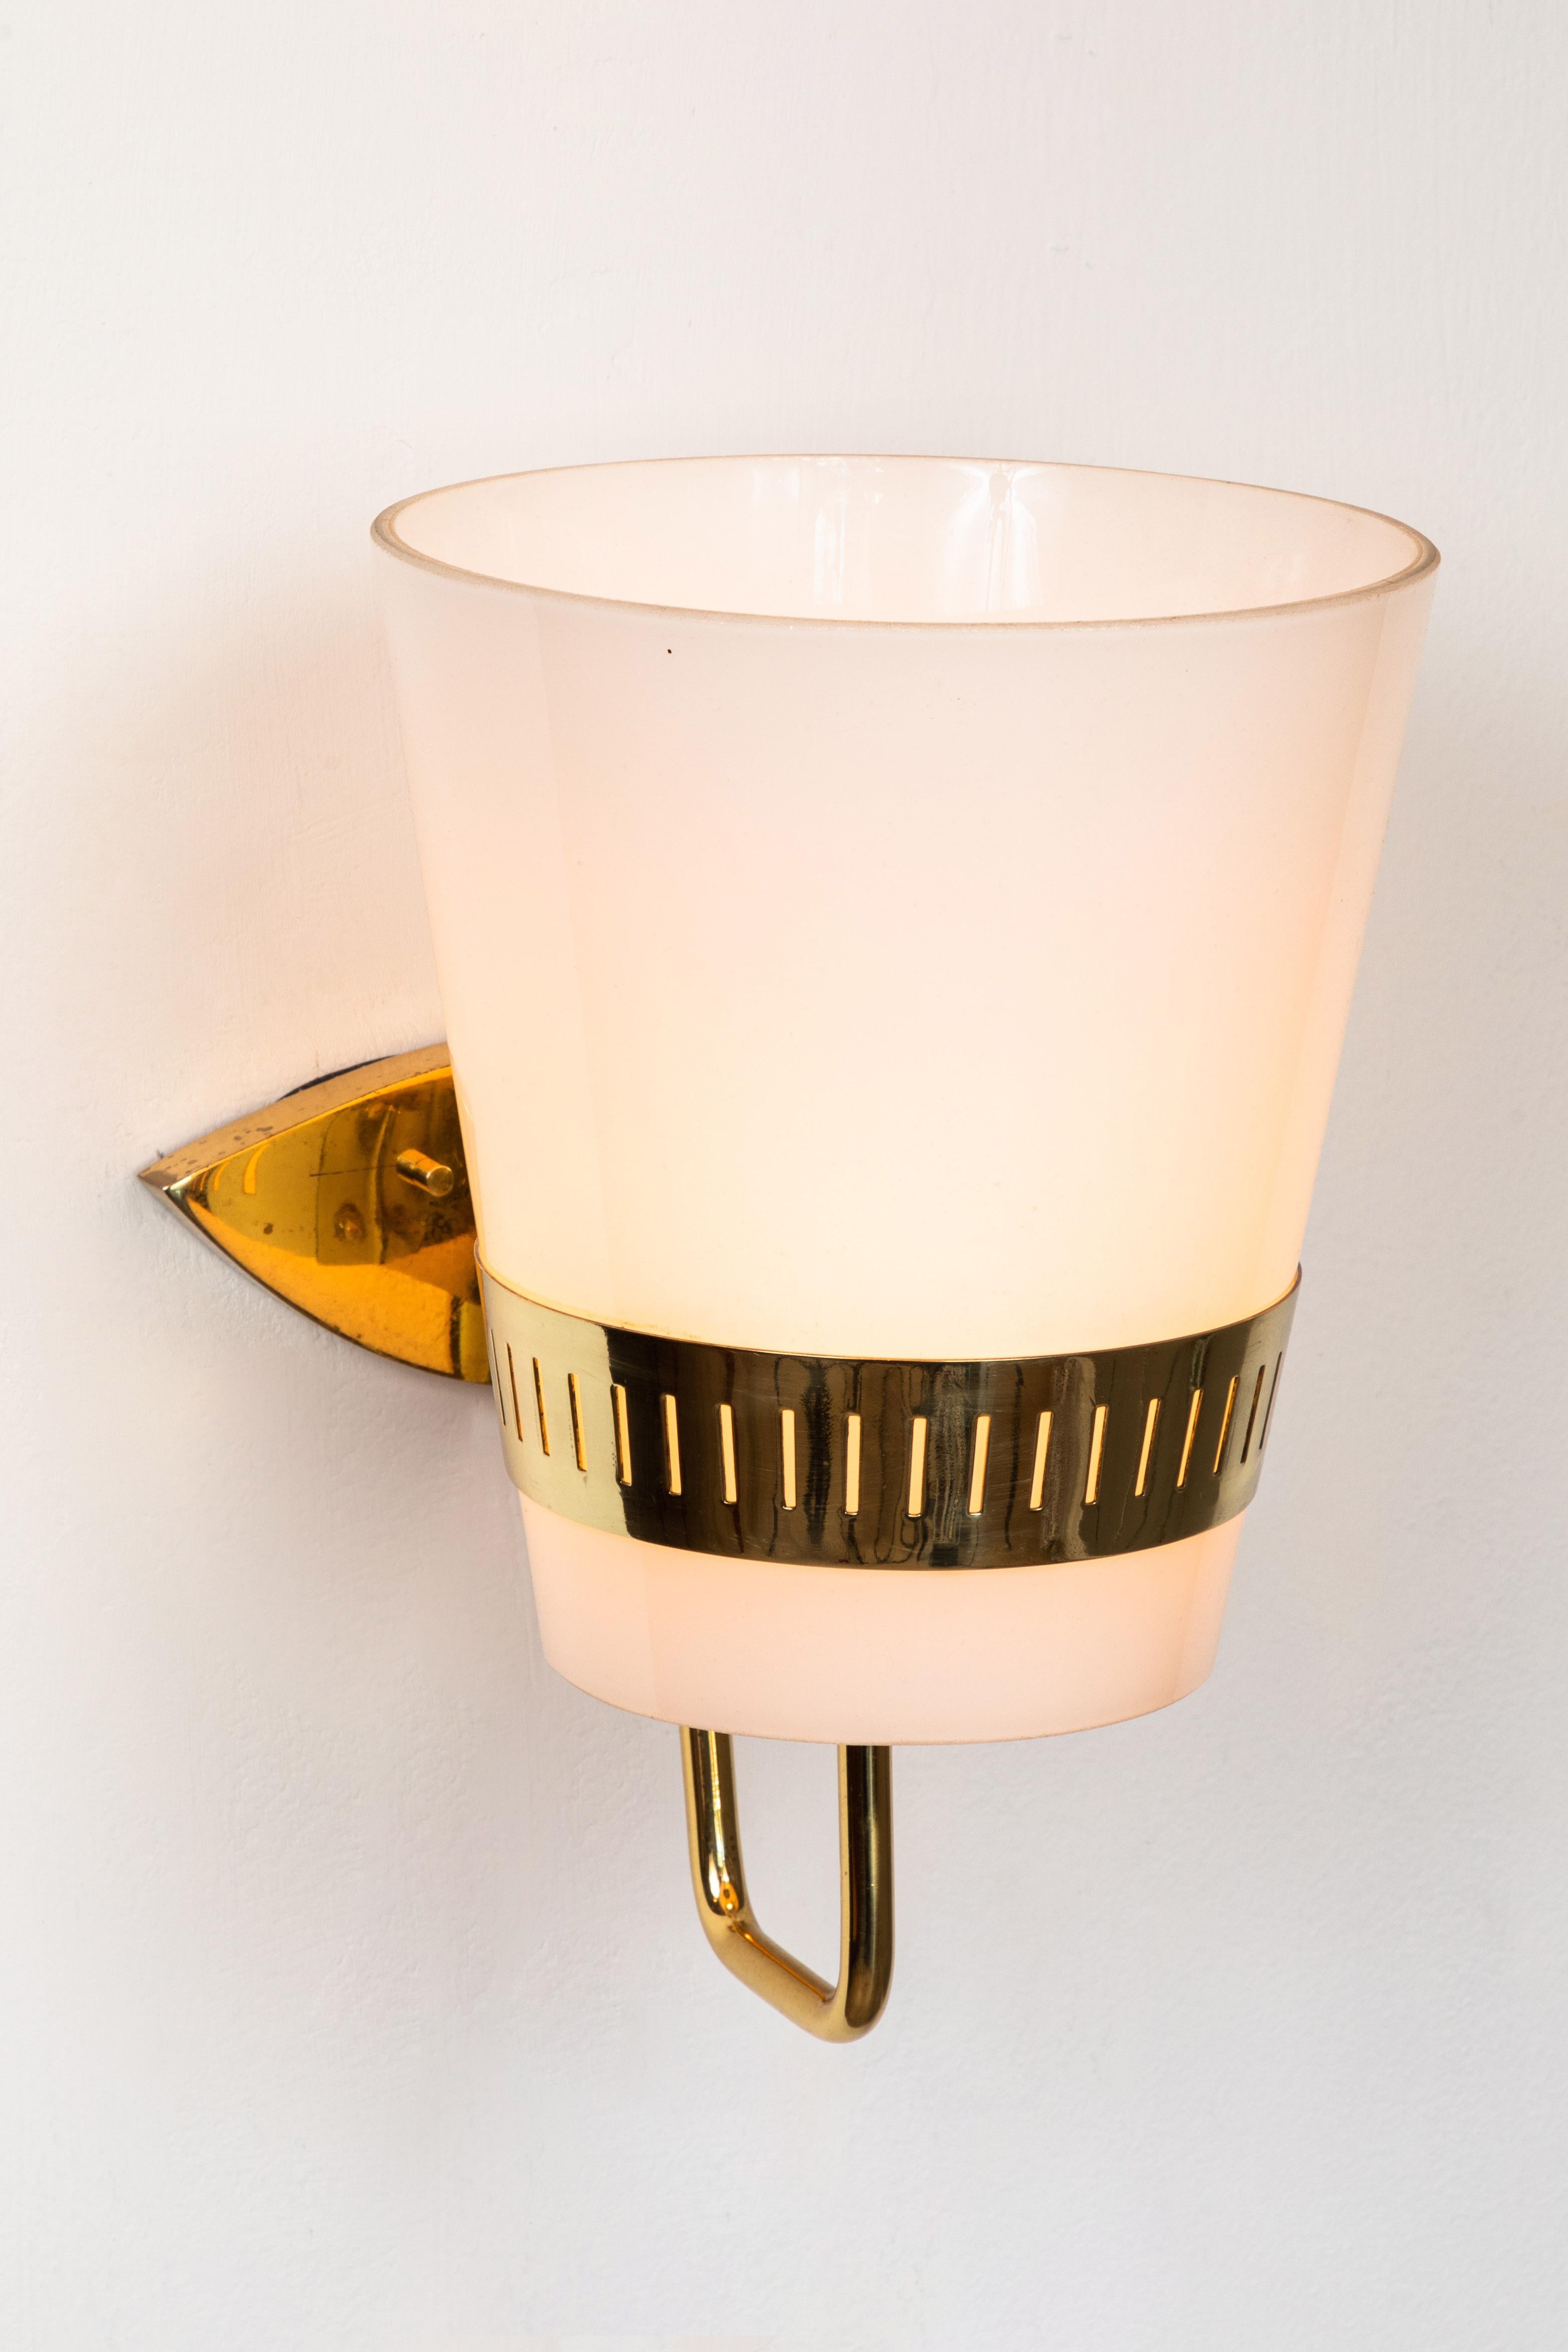 Large 1950s Stilnovo Brass and Glass Sconce In Good Condition For Sale In Glendale, CA